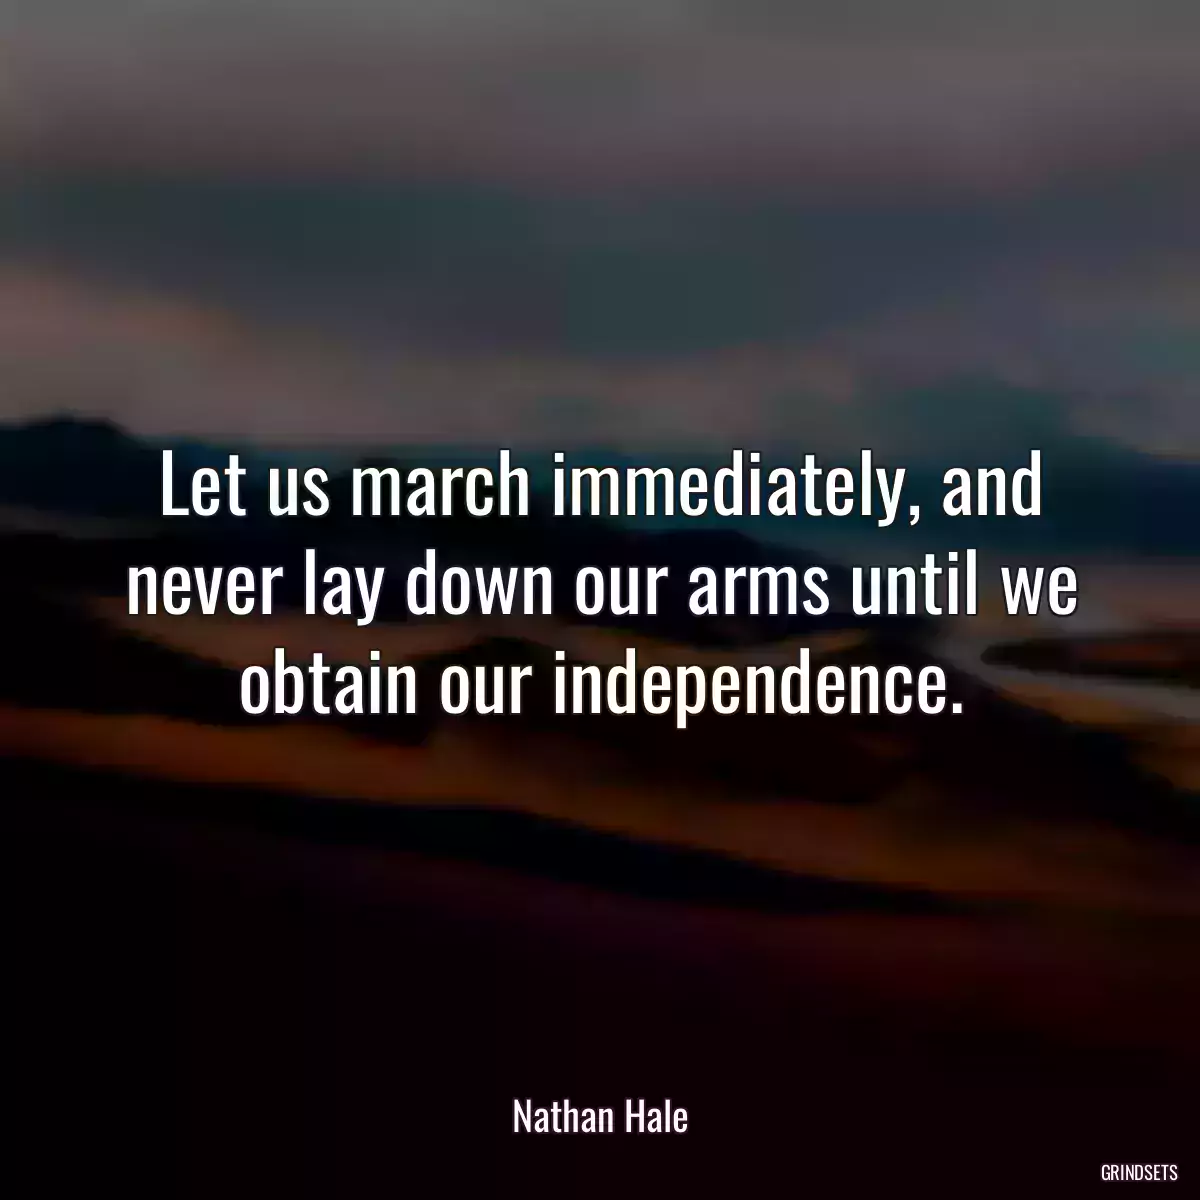 Let us march immediately, and never lay down our arms until we obtain our independence.